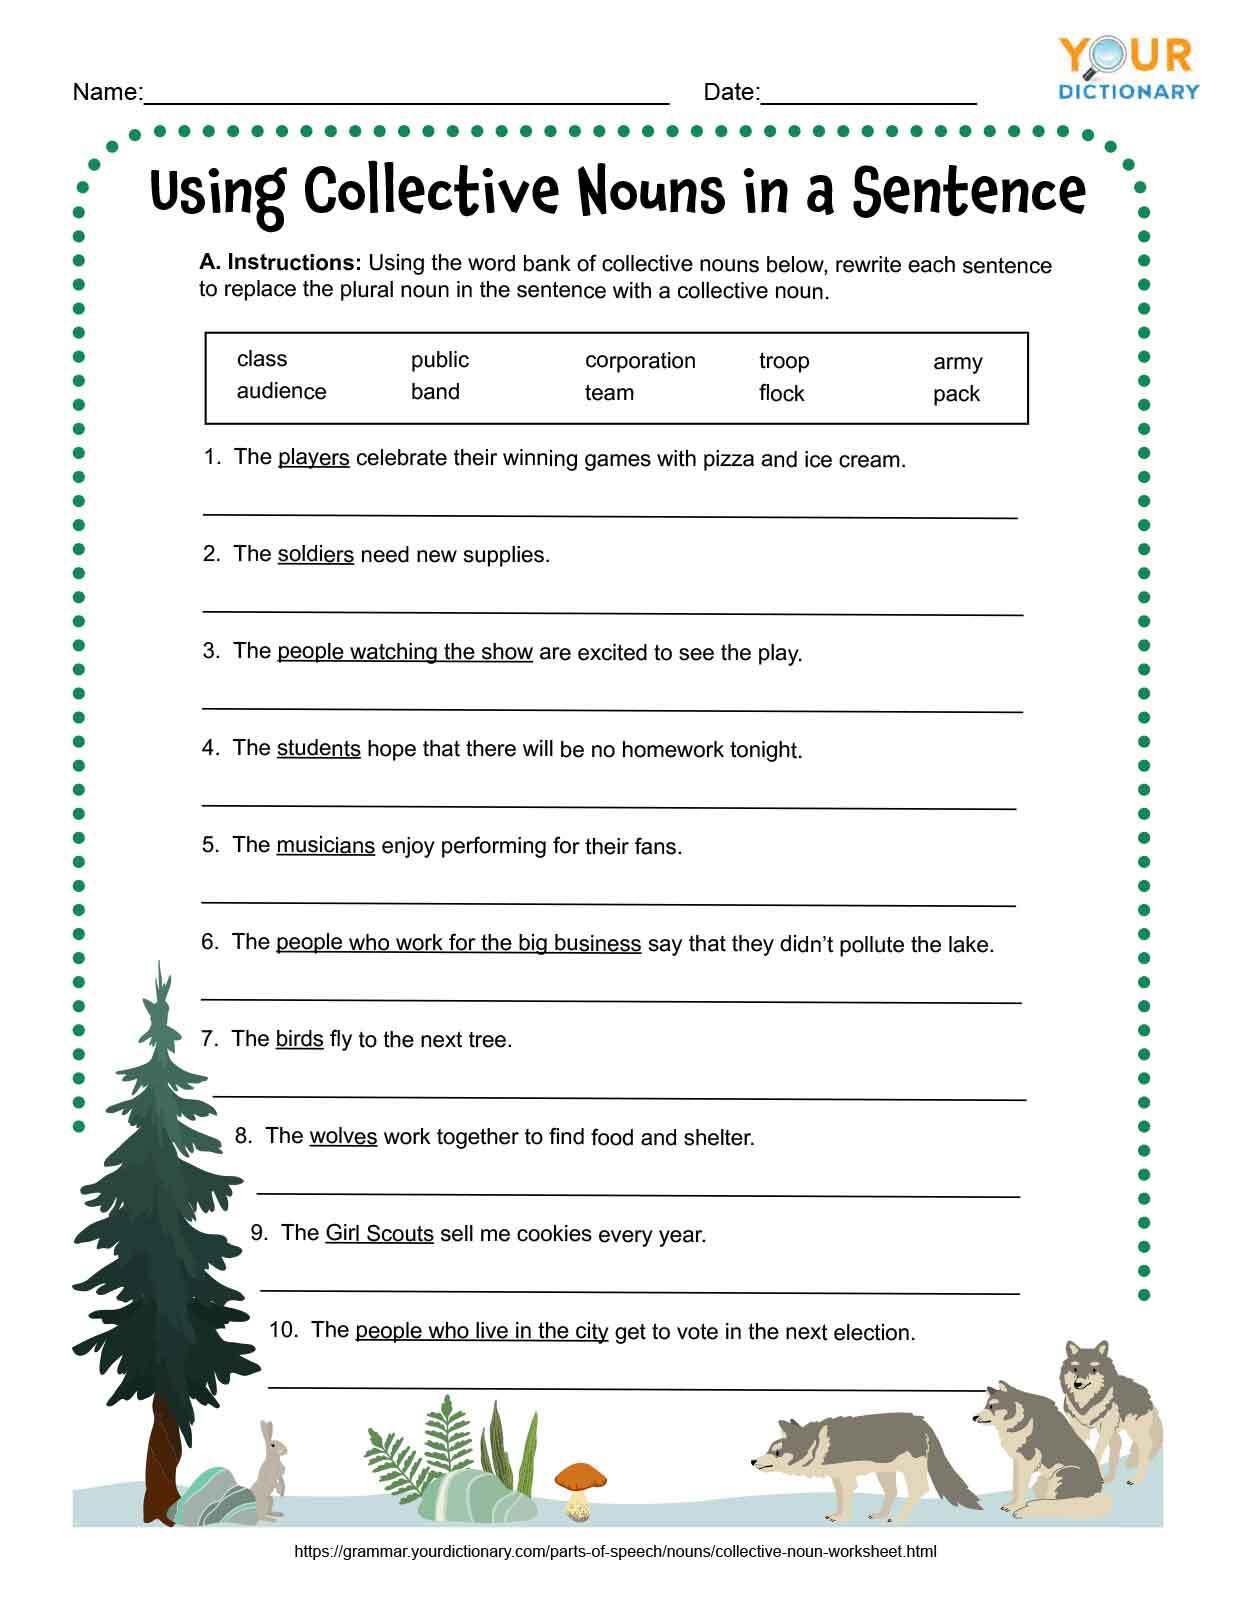 Collective Nouns Online Worksheet Image Result For Noun Activities 